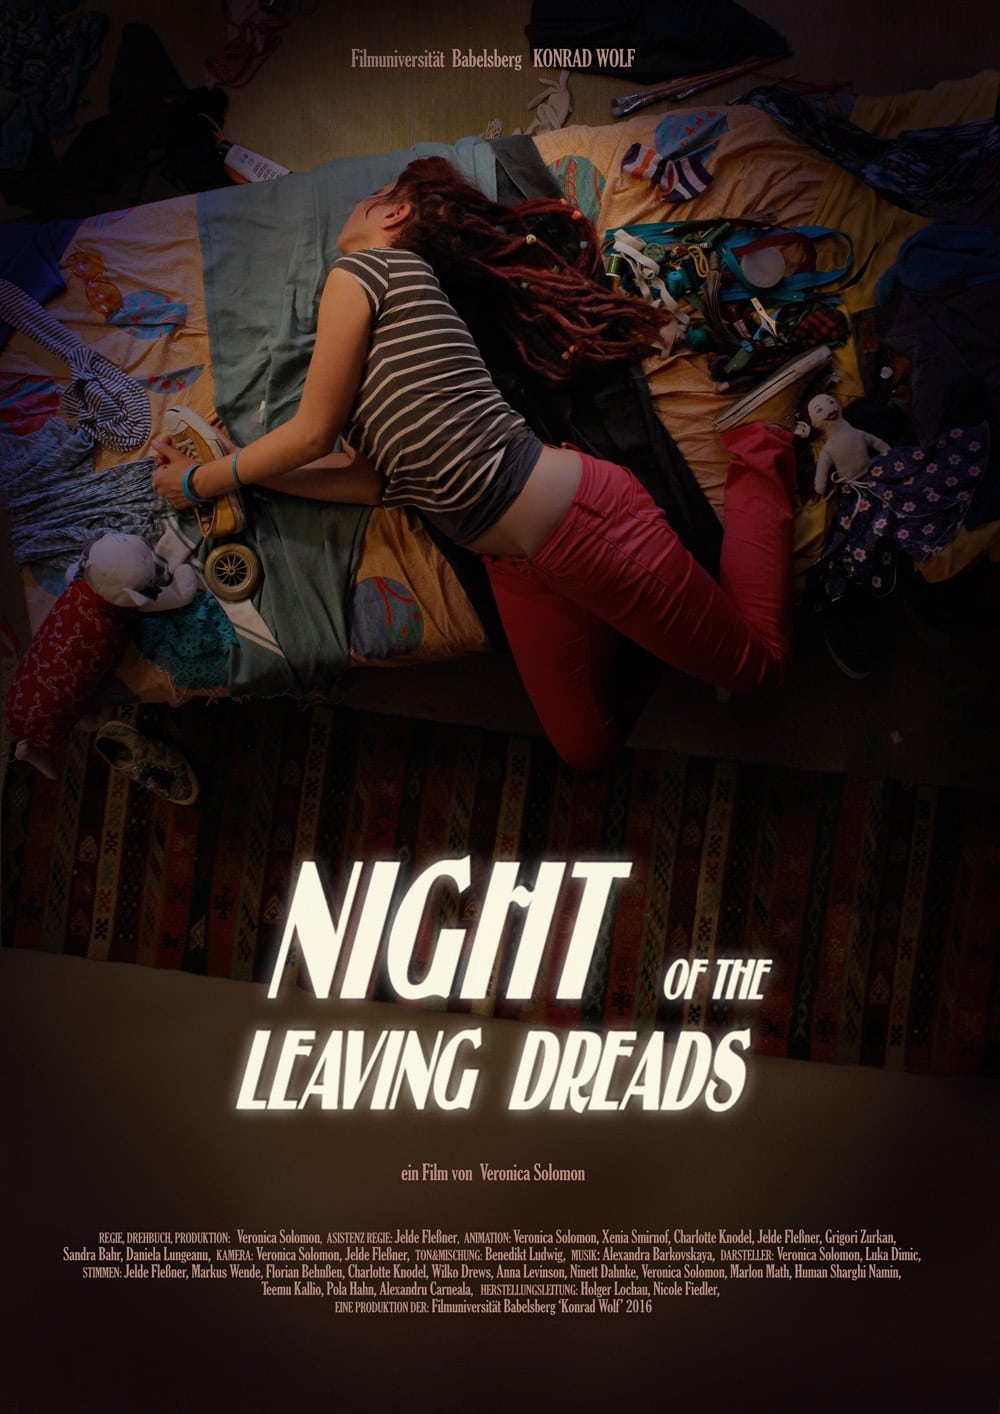 Night of the Leaving Dreads